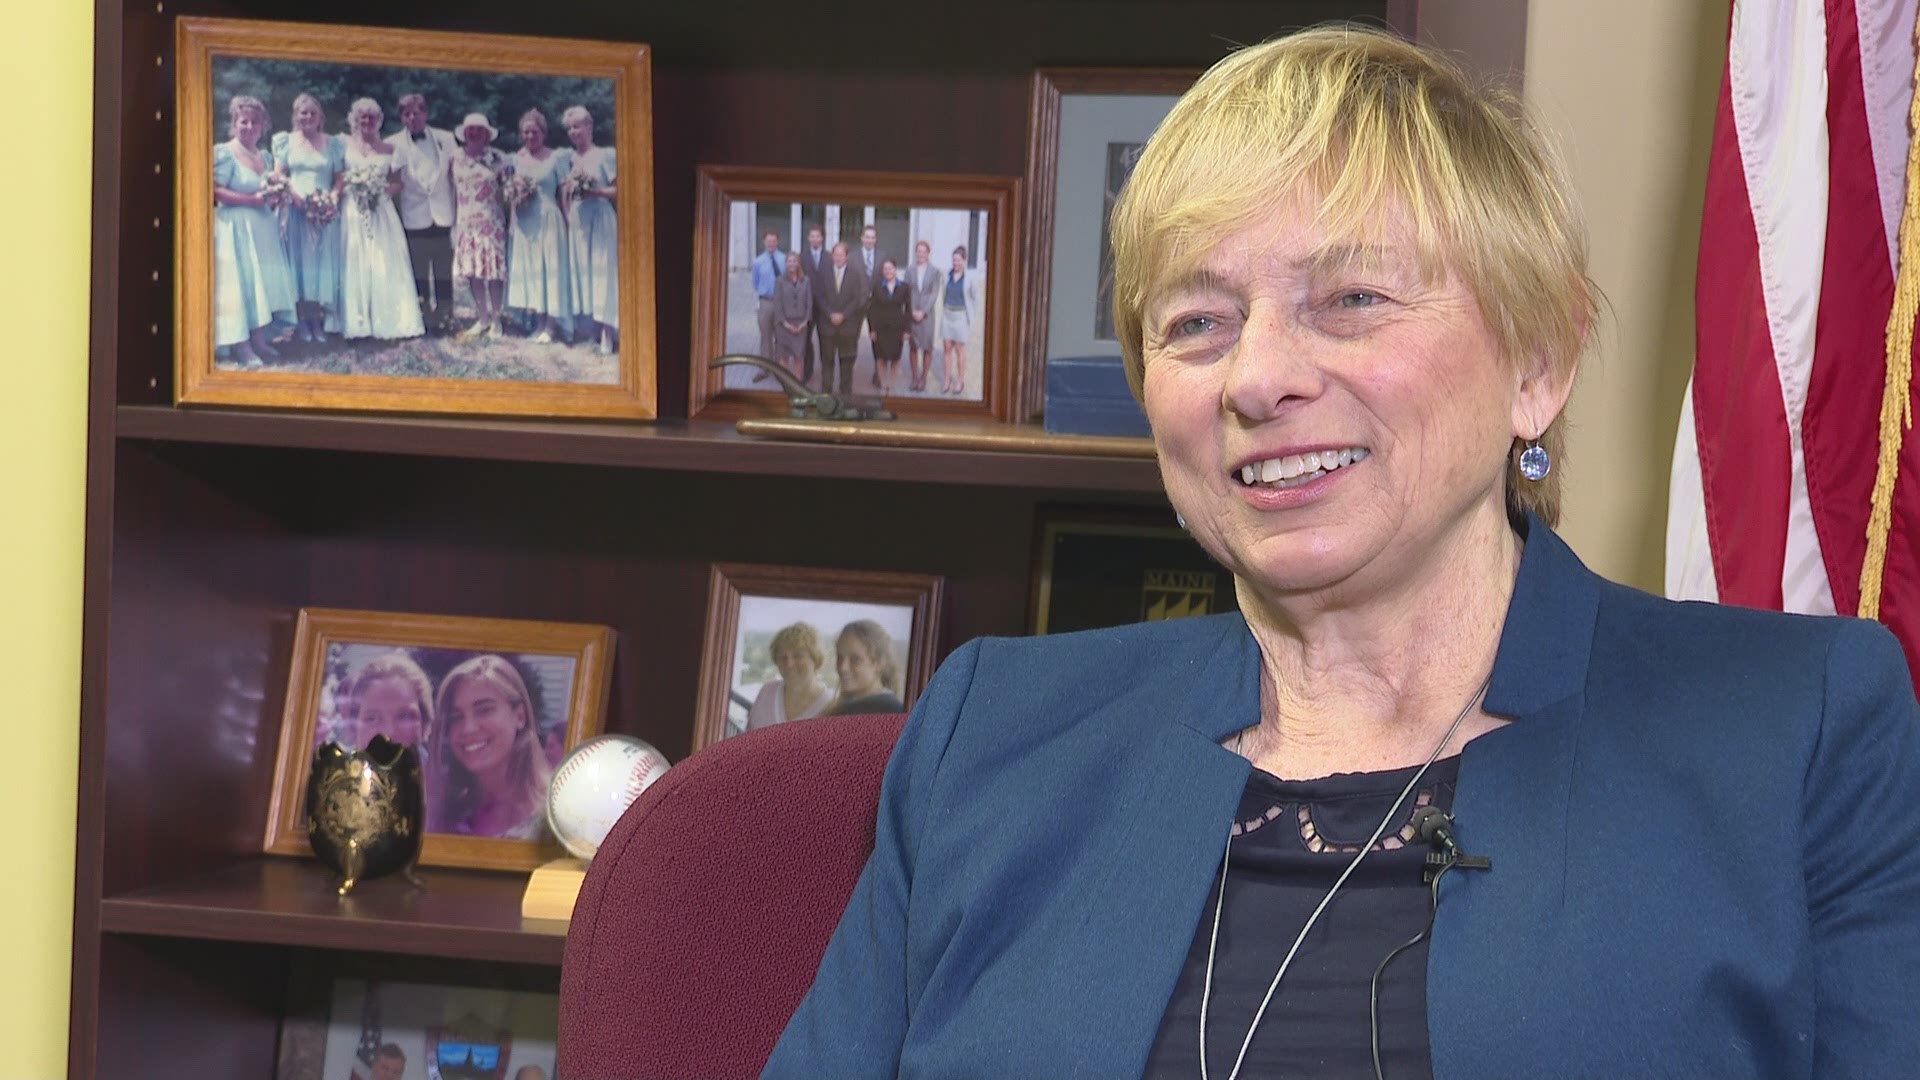 Janet Mills: Janet talks about getting advice from her siblings